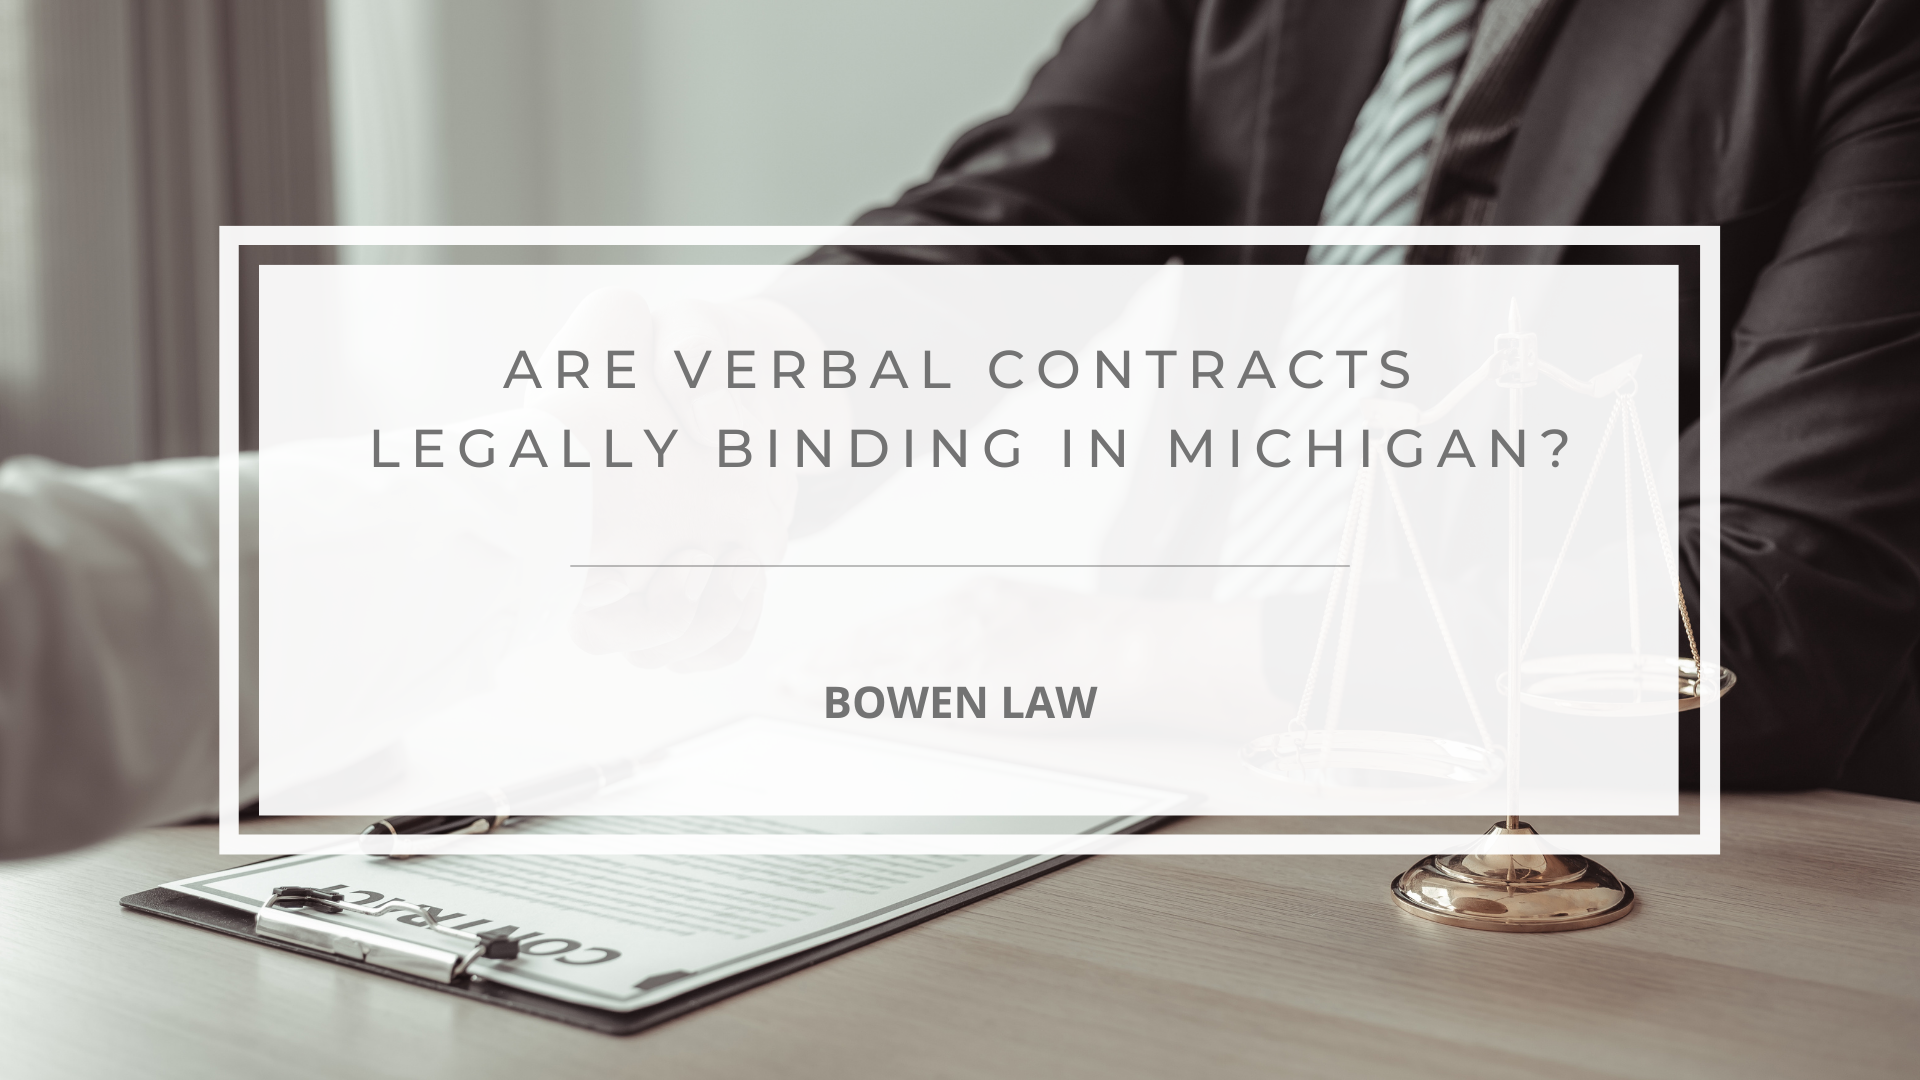 Featured image of are verbal contracts legally binding in michigan?